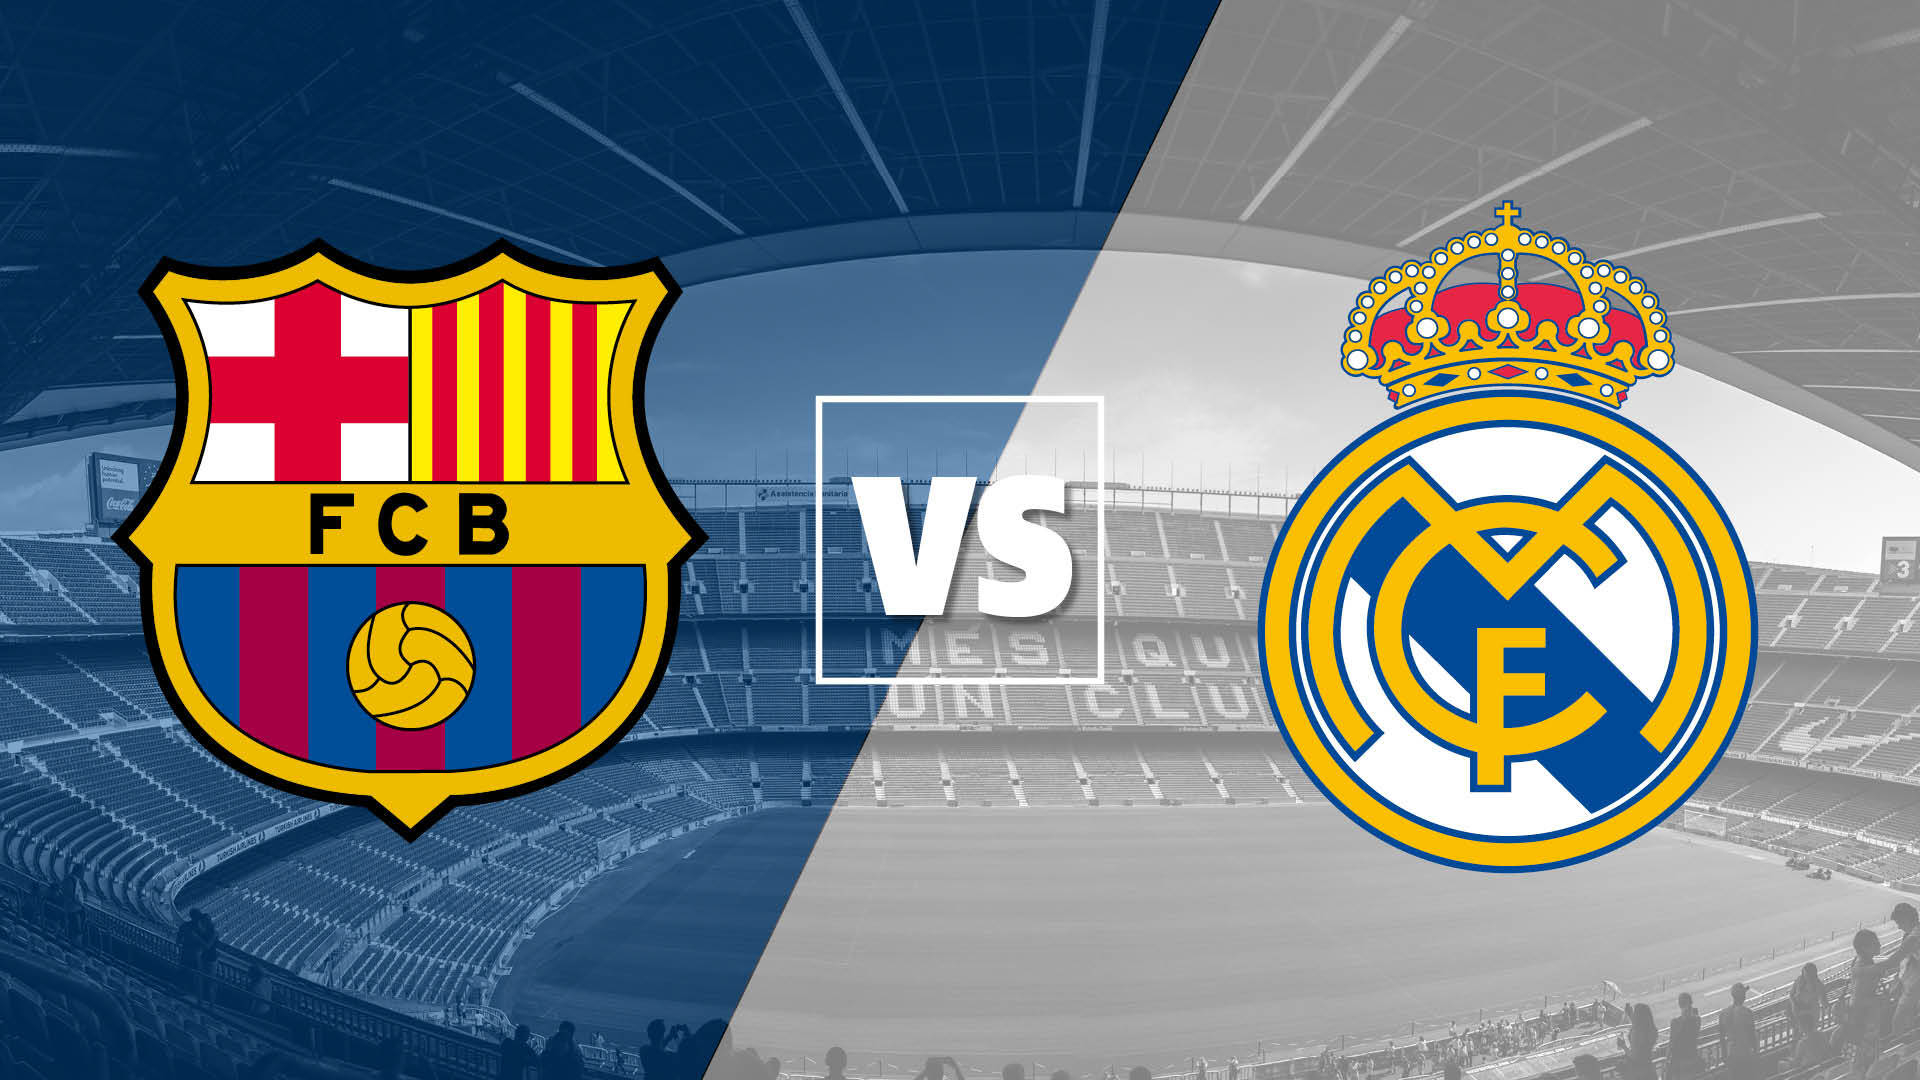 1920x1080 Real Madrid vs Barcelona will face off in El Clasico on March 20